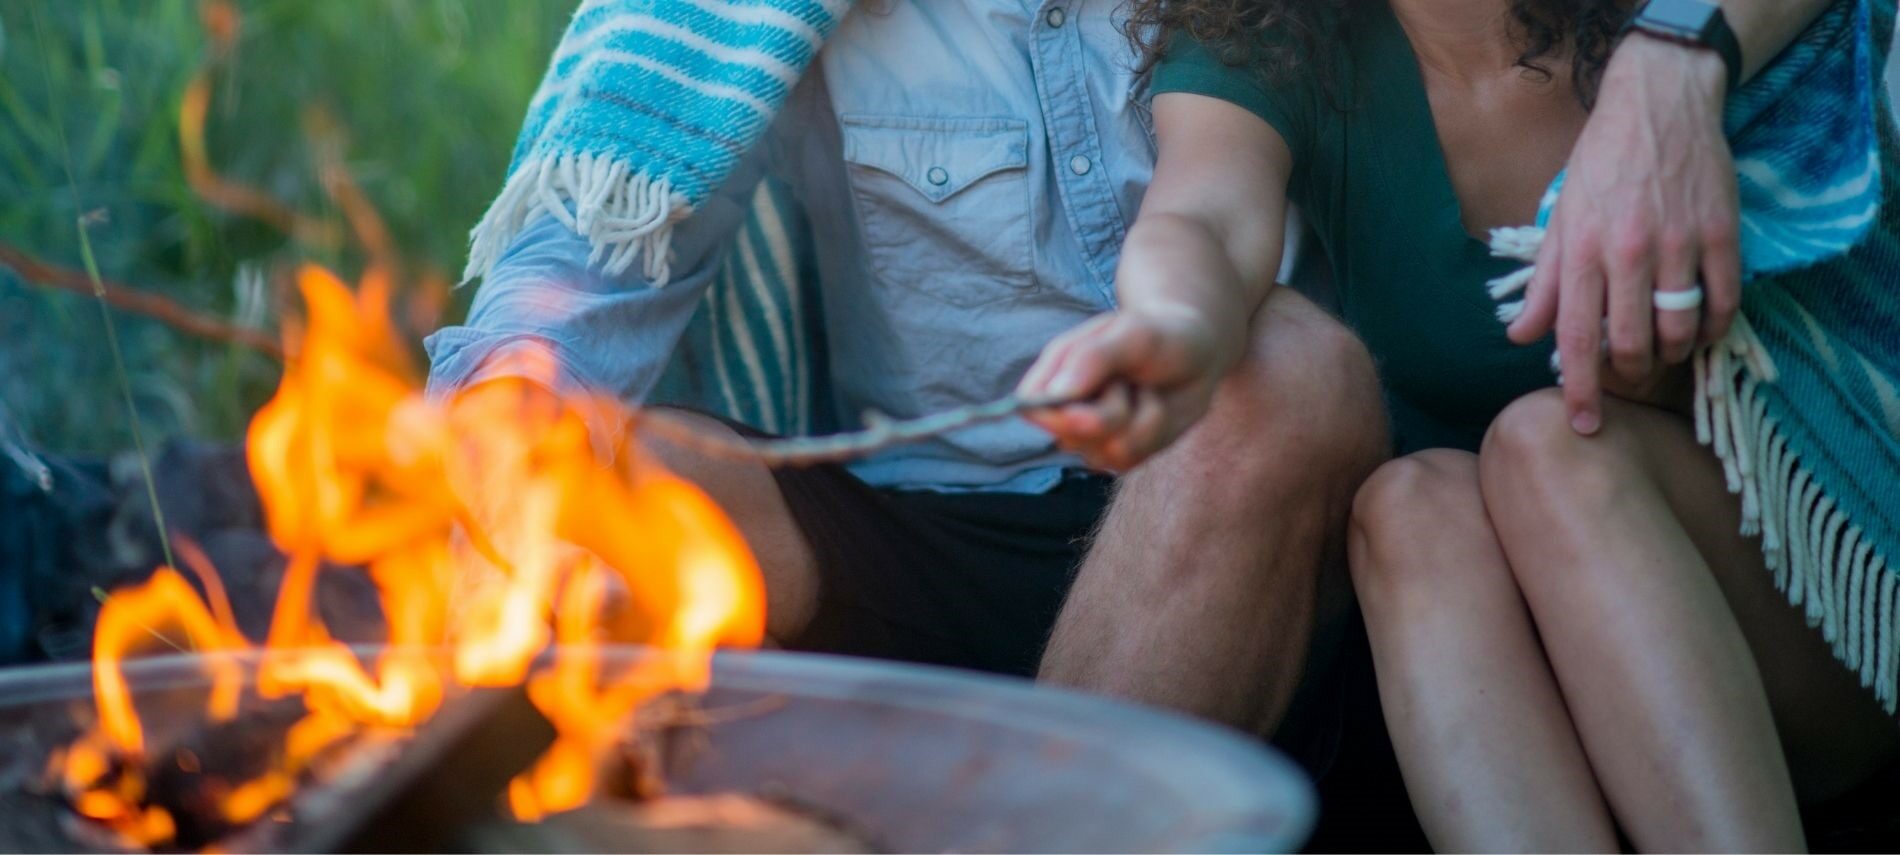 Couple sitting by outdoor firepit roasting marshmallows